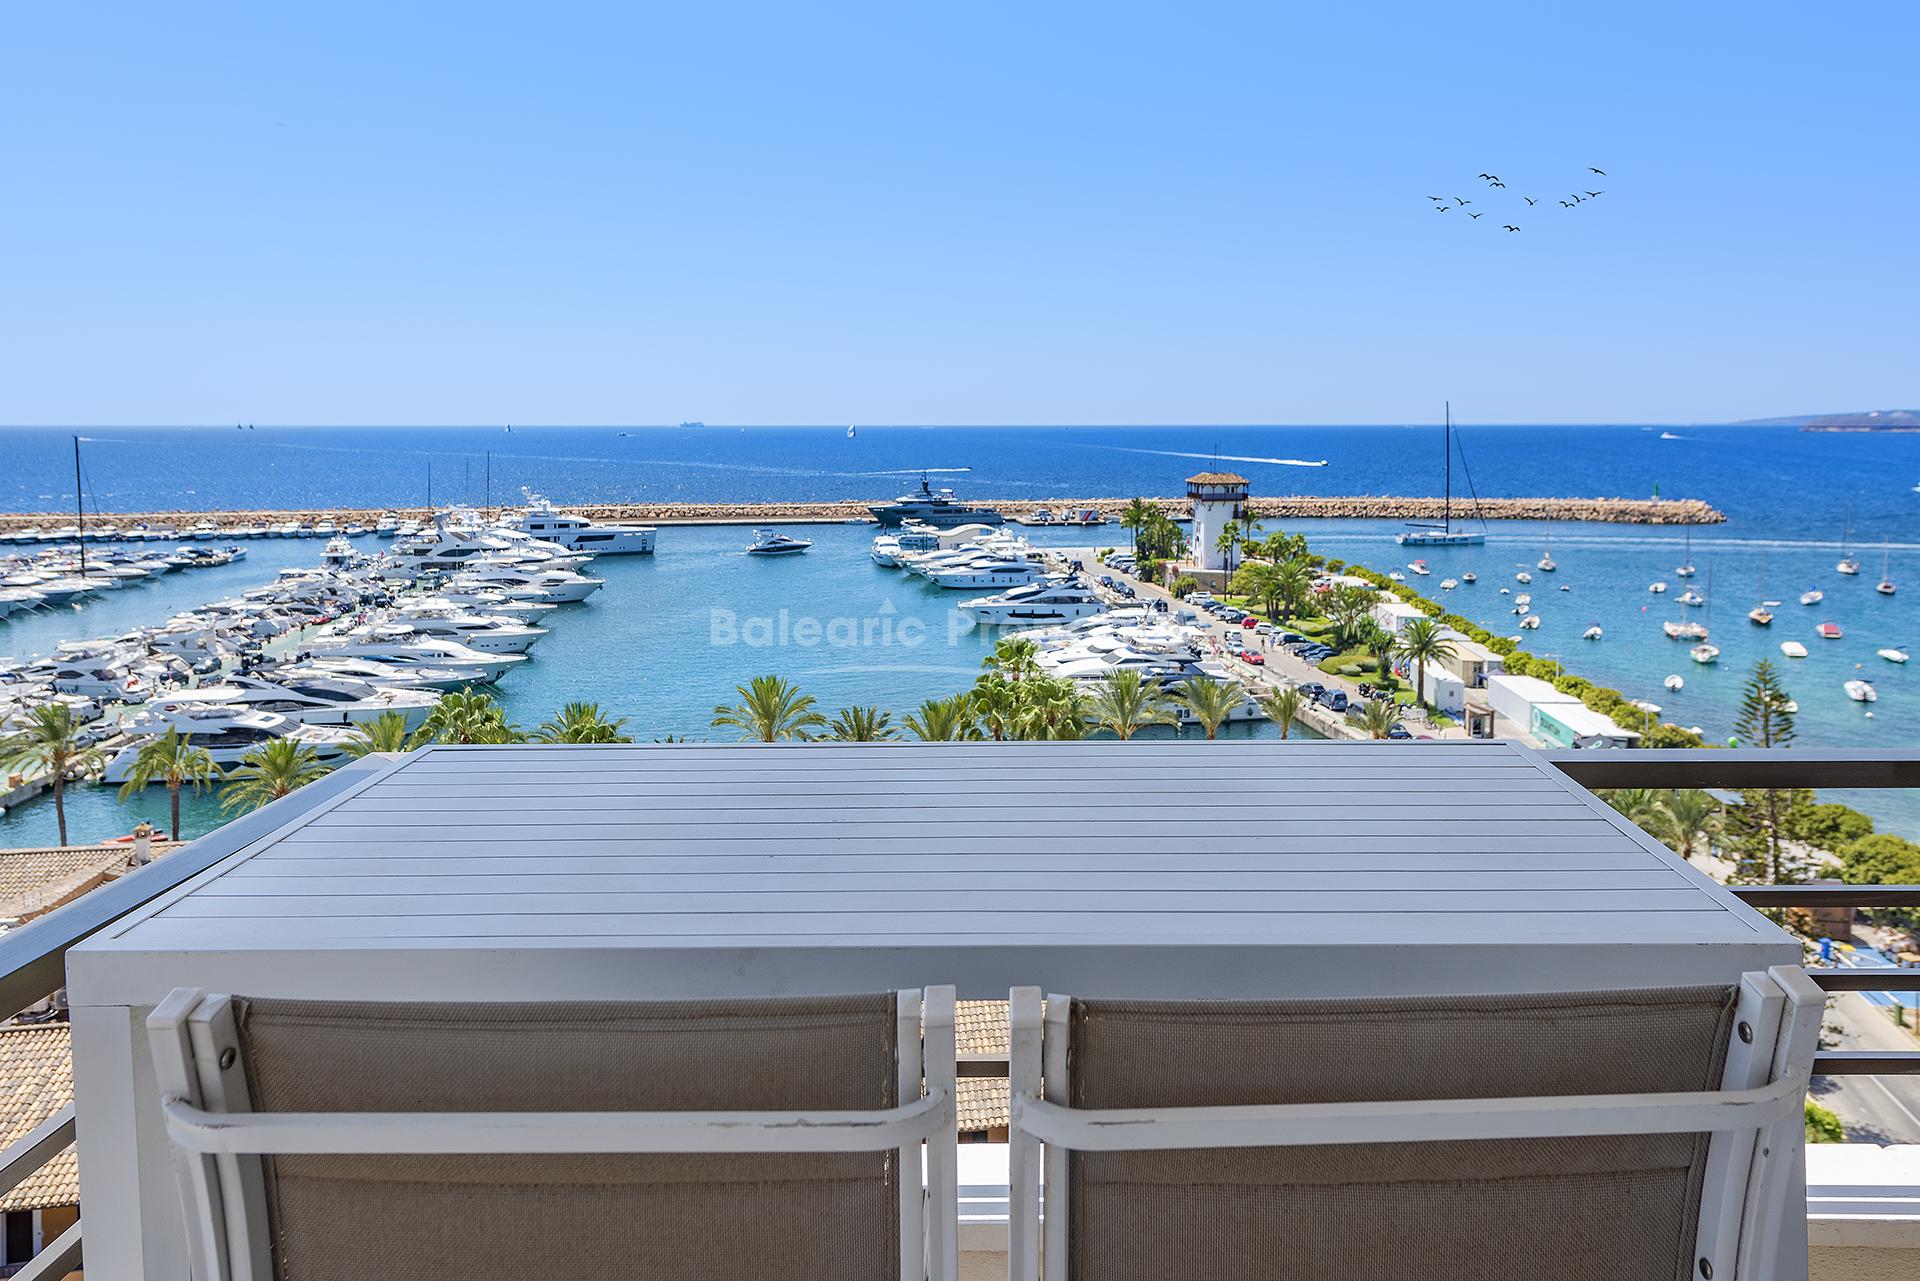 Immaculate apartment for sale overlooking the marina in Puerto Portals, Mallorca